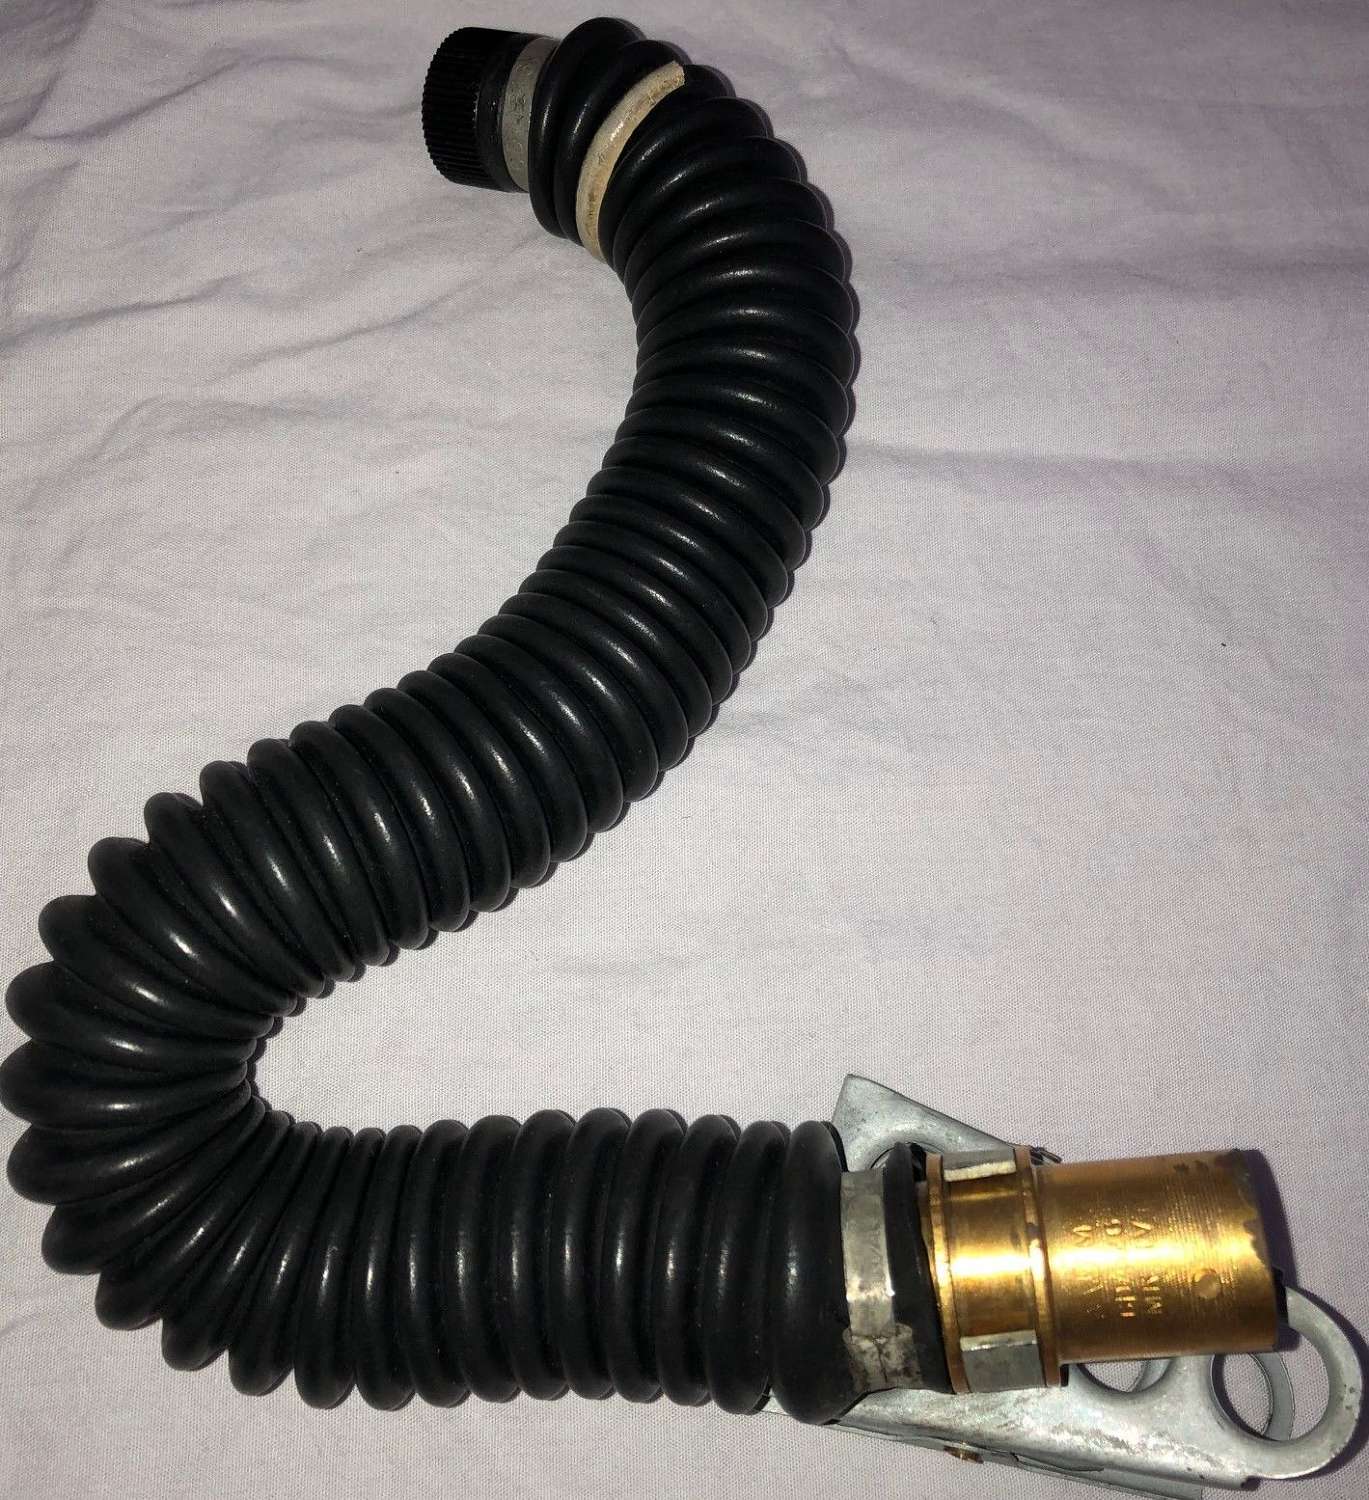 A WWII RAF RAF FLYING MASK OXYGEN HOSE COMPLETE WITH CONNECTORS ETC